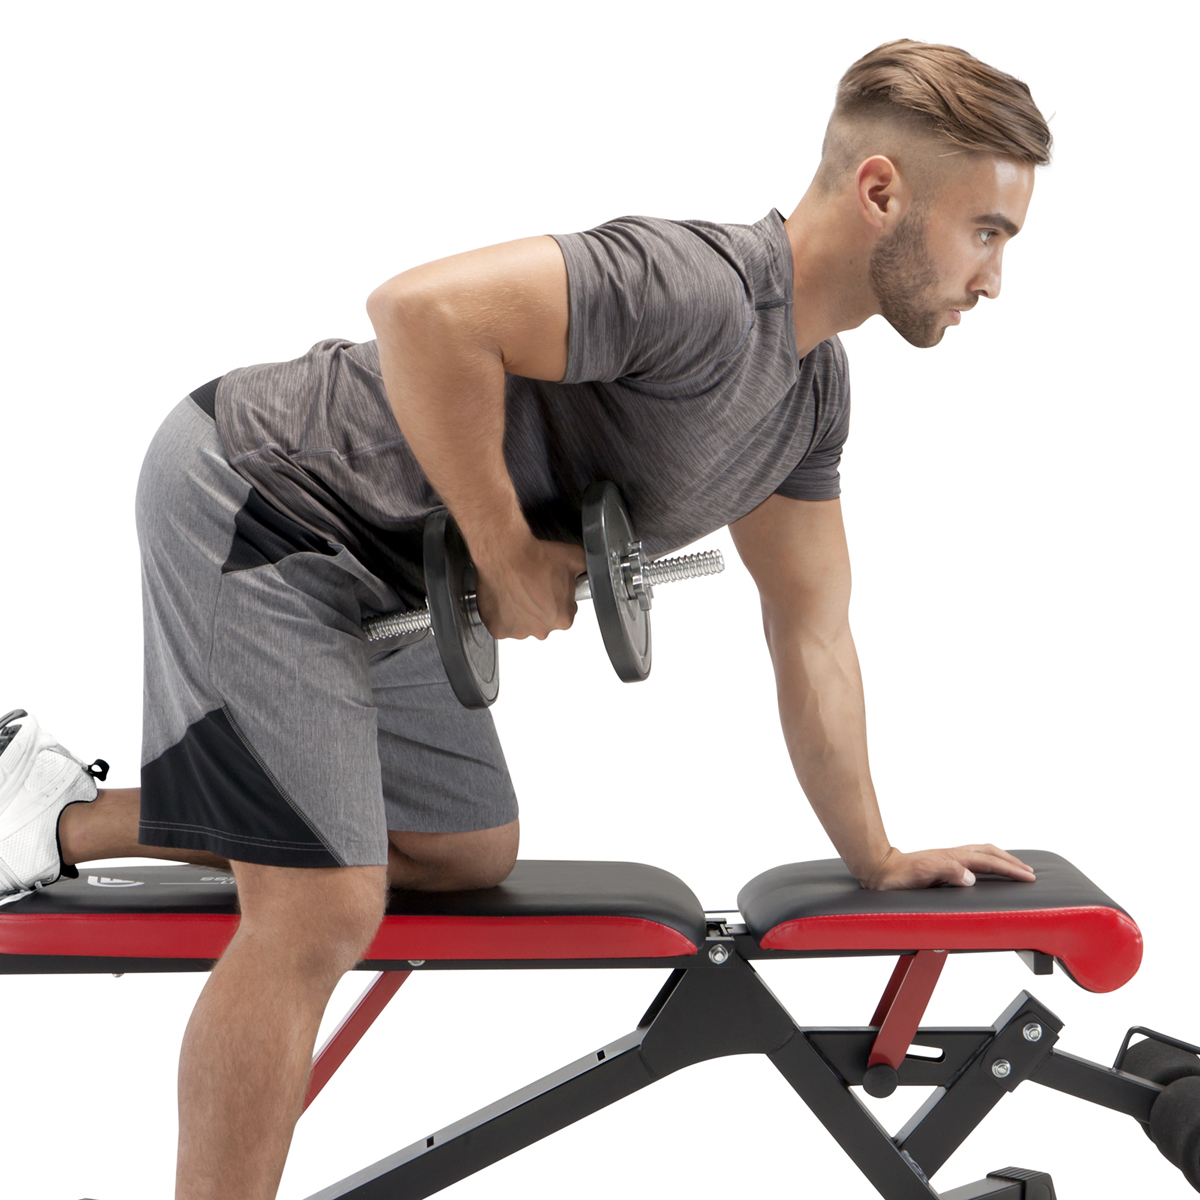 1HP201 - Fully adjustable bench 